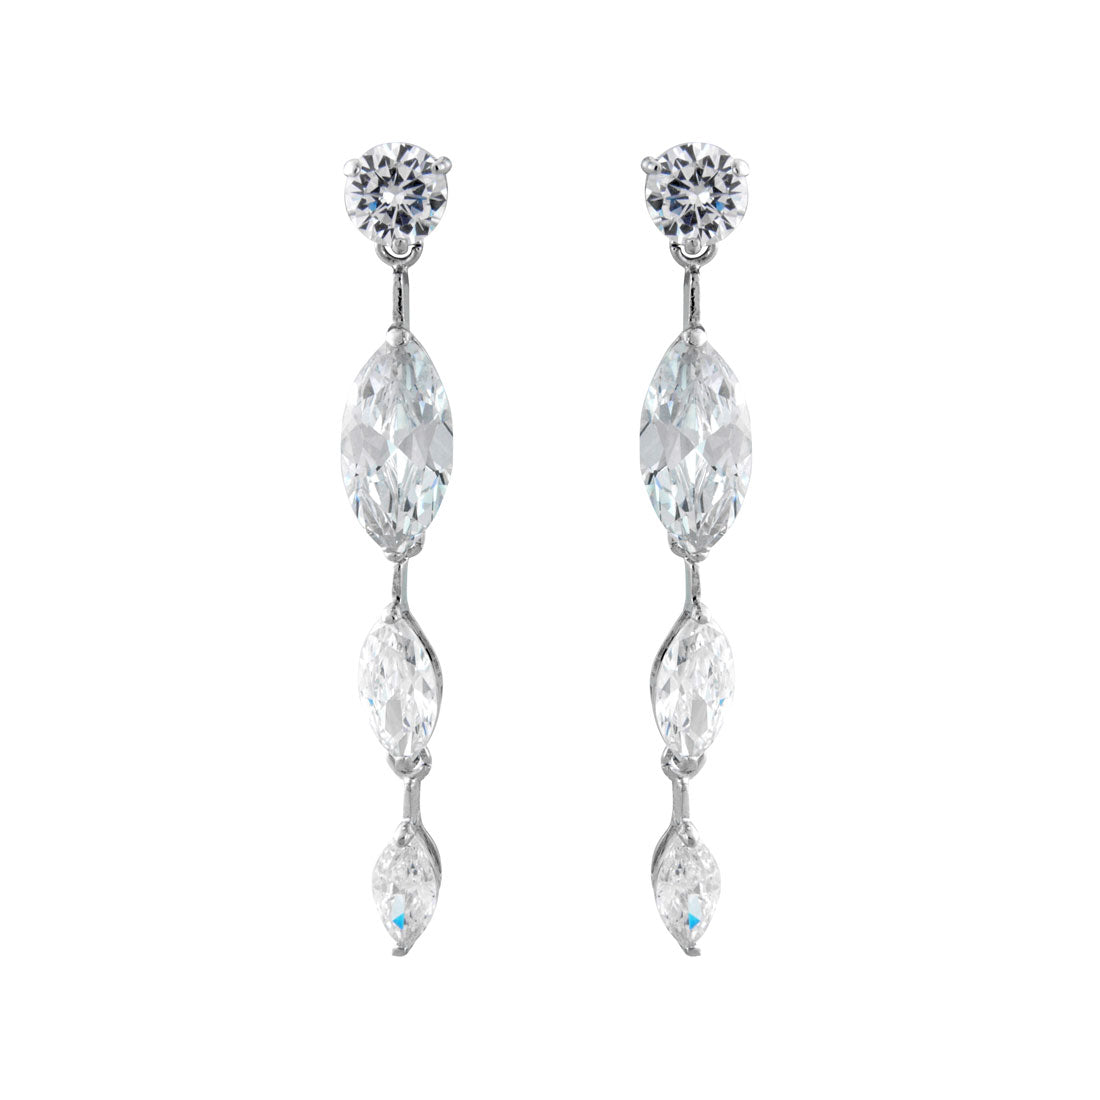 Elegance of Glamour Crystal Long Drop Earrings for Weddings & Occasions